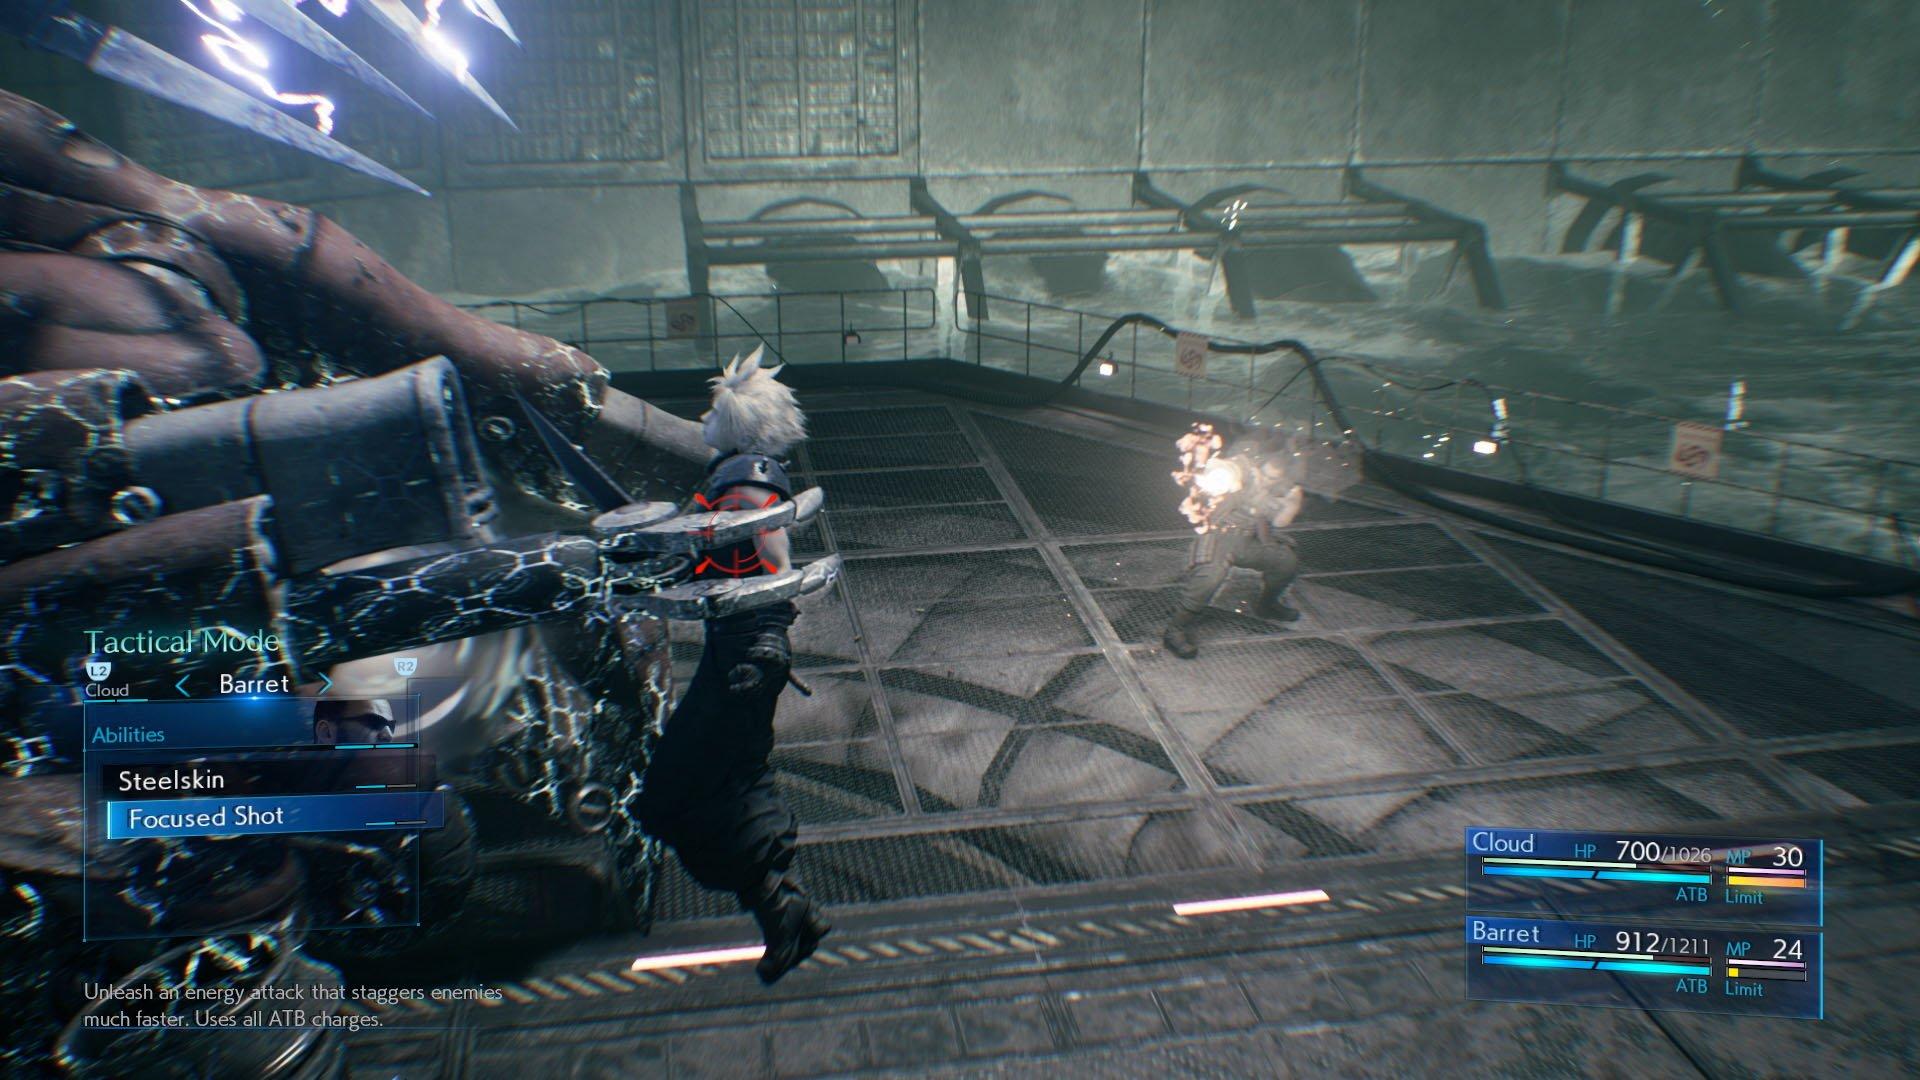 Final Fantasy 7 Remake for PS4 review: Back again to define